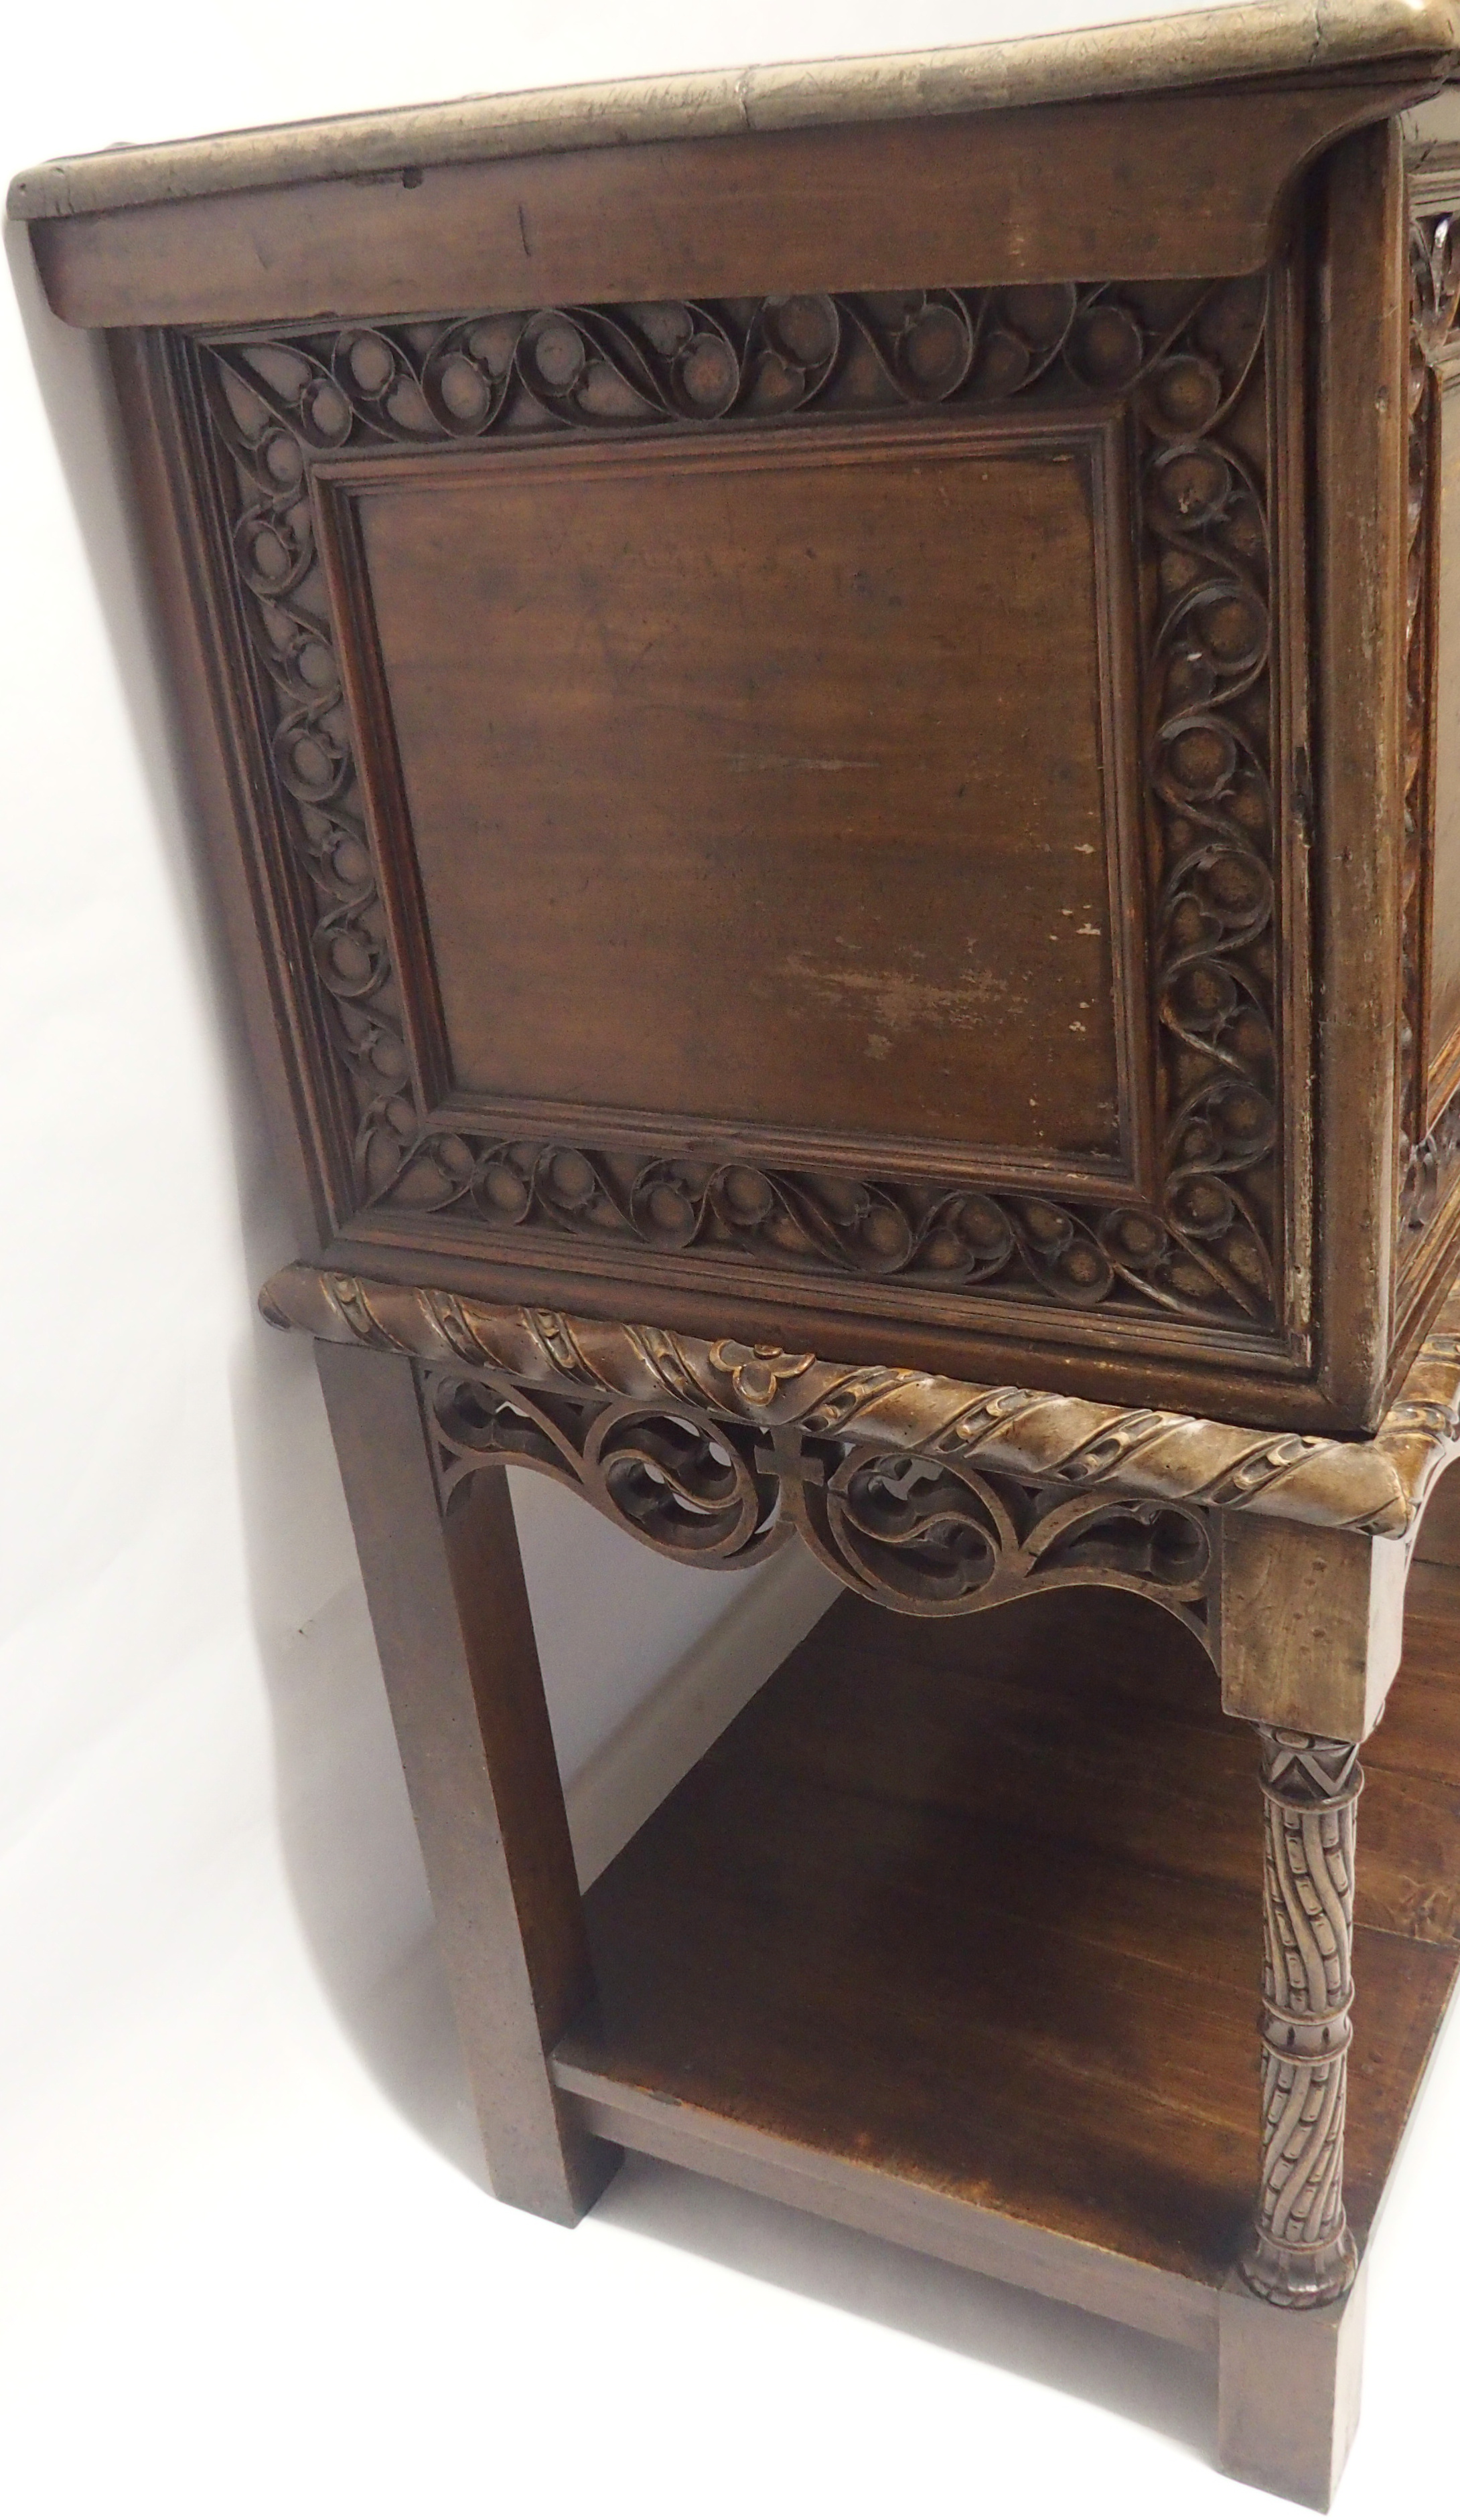 A FRENCH WALNUT LIVERY CUPBOARD the hinged top enclosing a deep and shallow recess, the front carved - Image 8 of 11